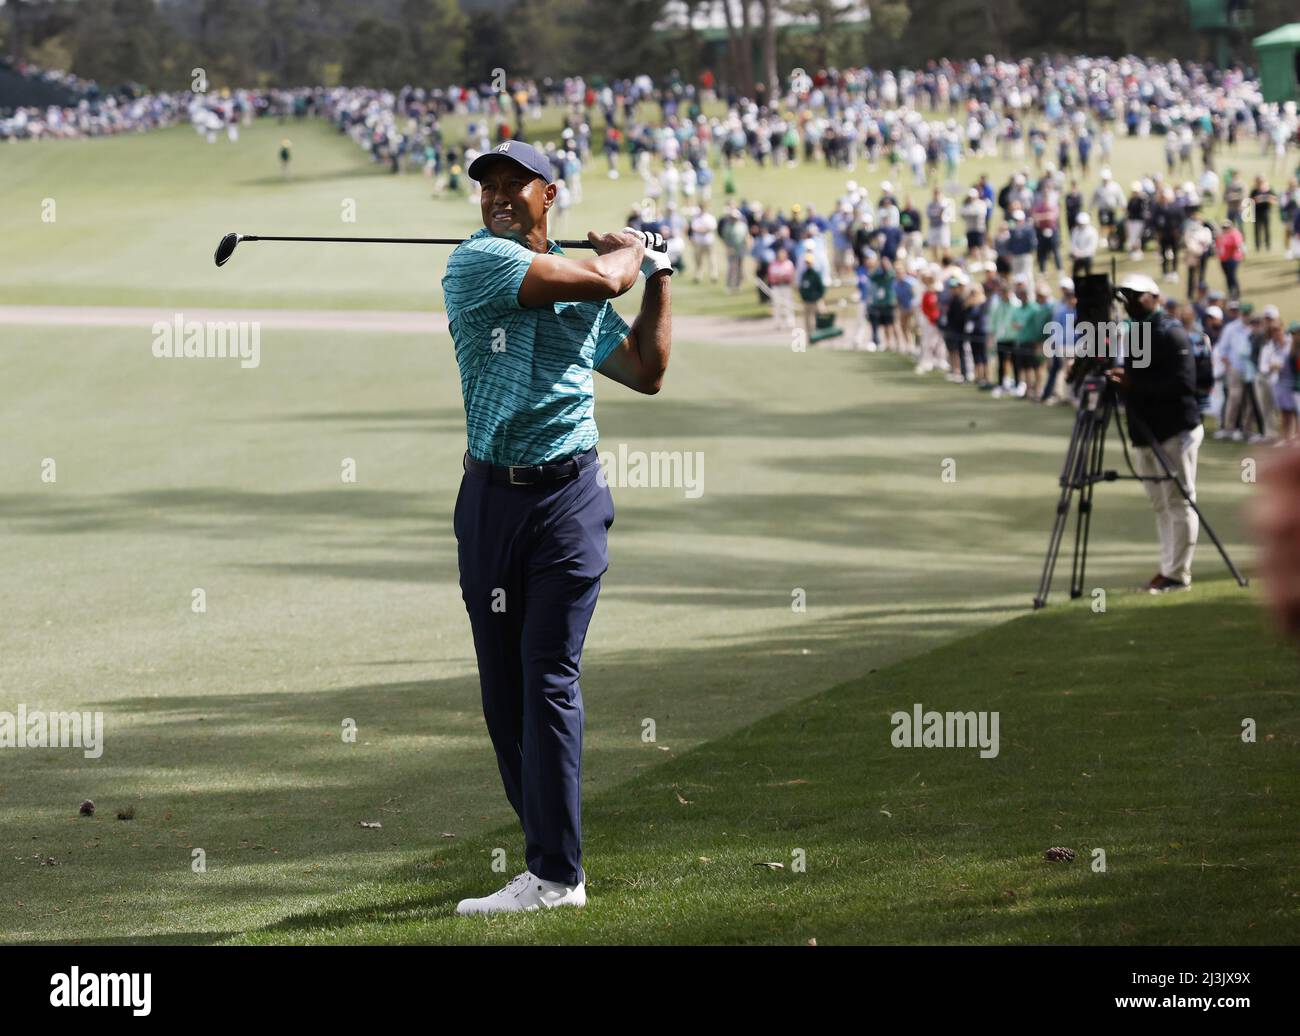 Augusta, USA. 08th Apr, 2022. Tiger Woods hit his second shot to the 8th hole in the second round of The Masters golf tournament at Augusta National Golf Club in Augusta, Georgia on Friday, April 8, 2022. Photo by John Angelillo/UPI Credit: UPI/Alamy Live News Stock Photo